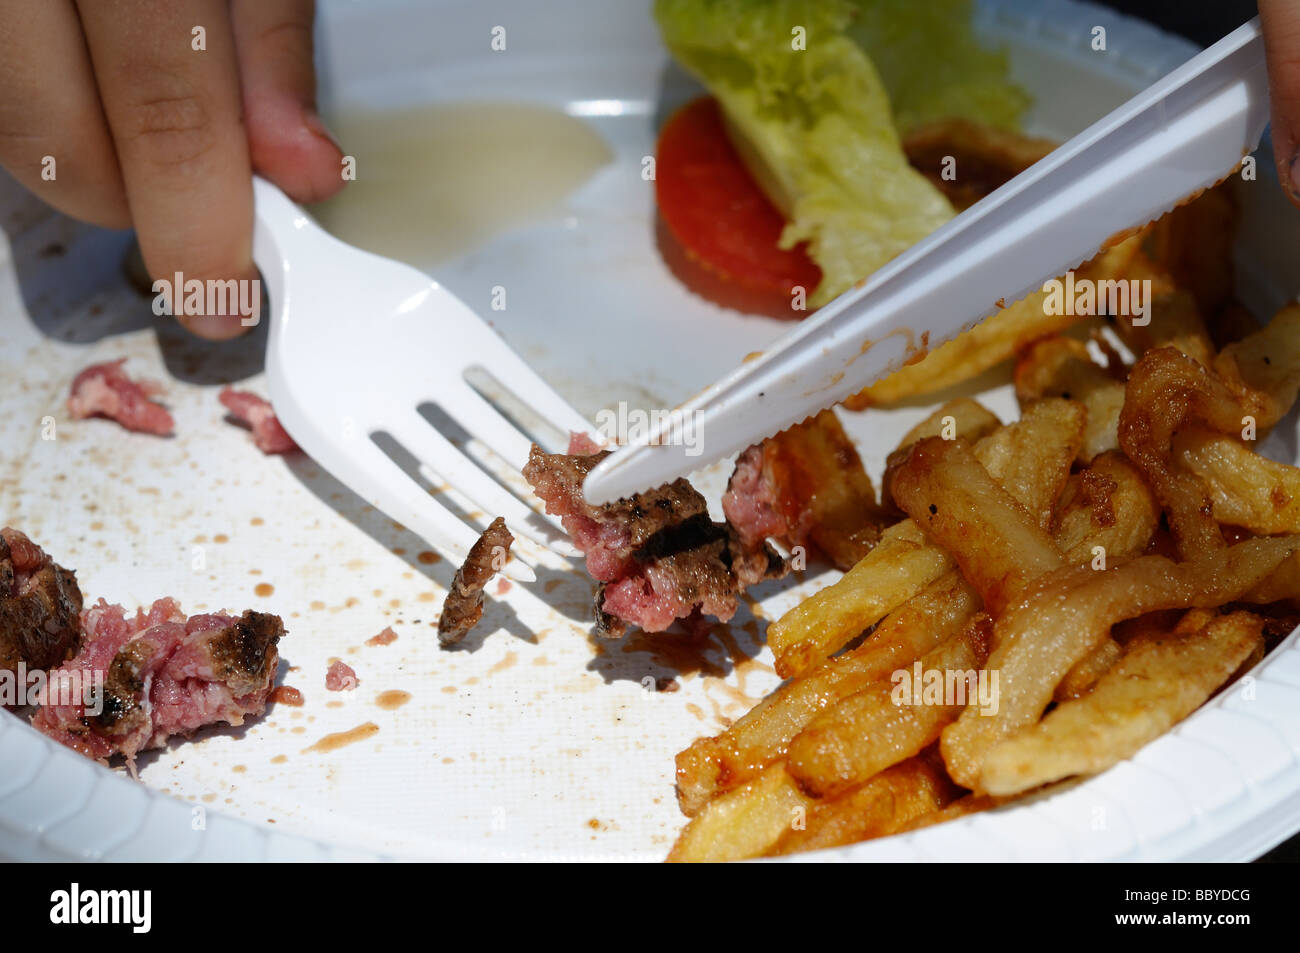 Stock photo of a plate of burger and chips The burger is cooked with the meat red in the middle as is normal in France Stock Photo